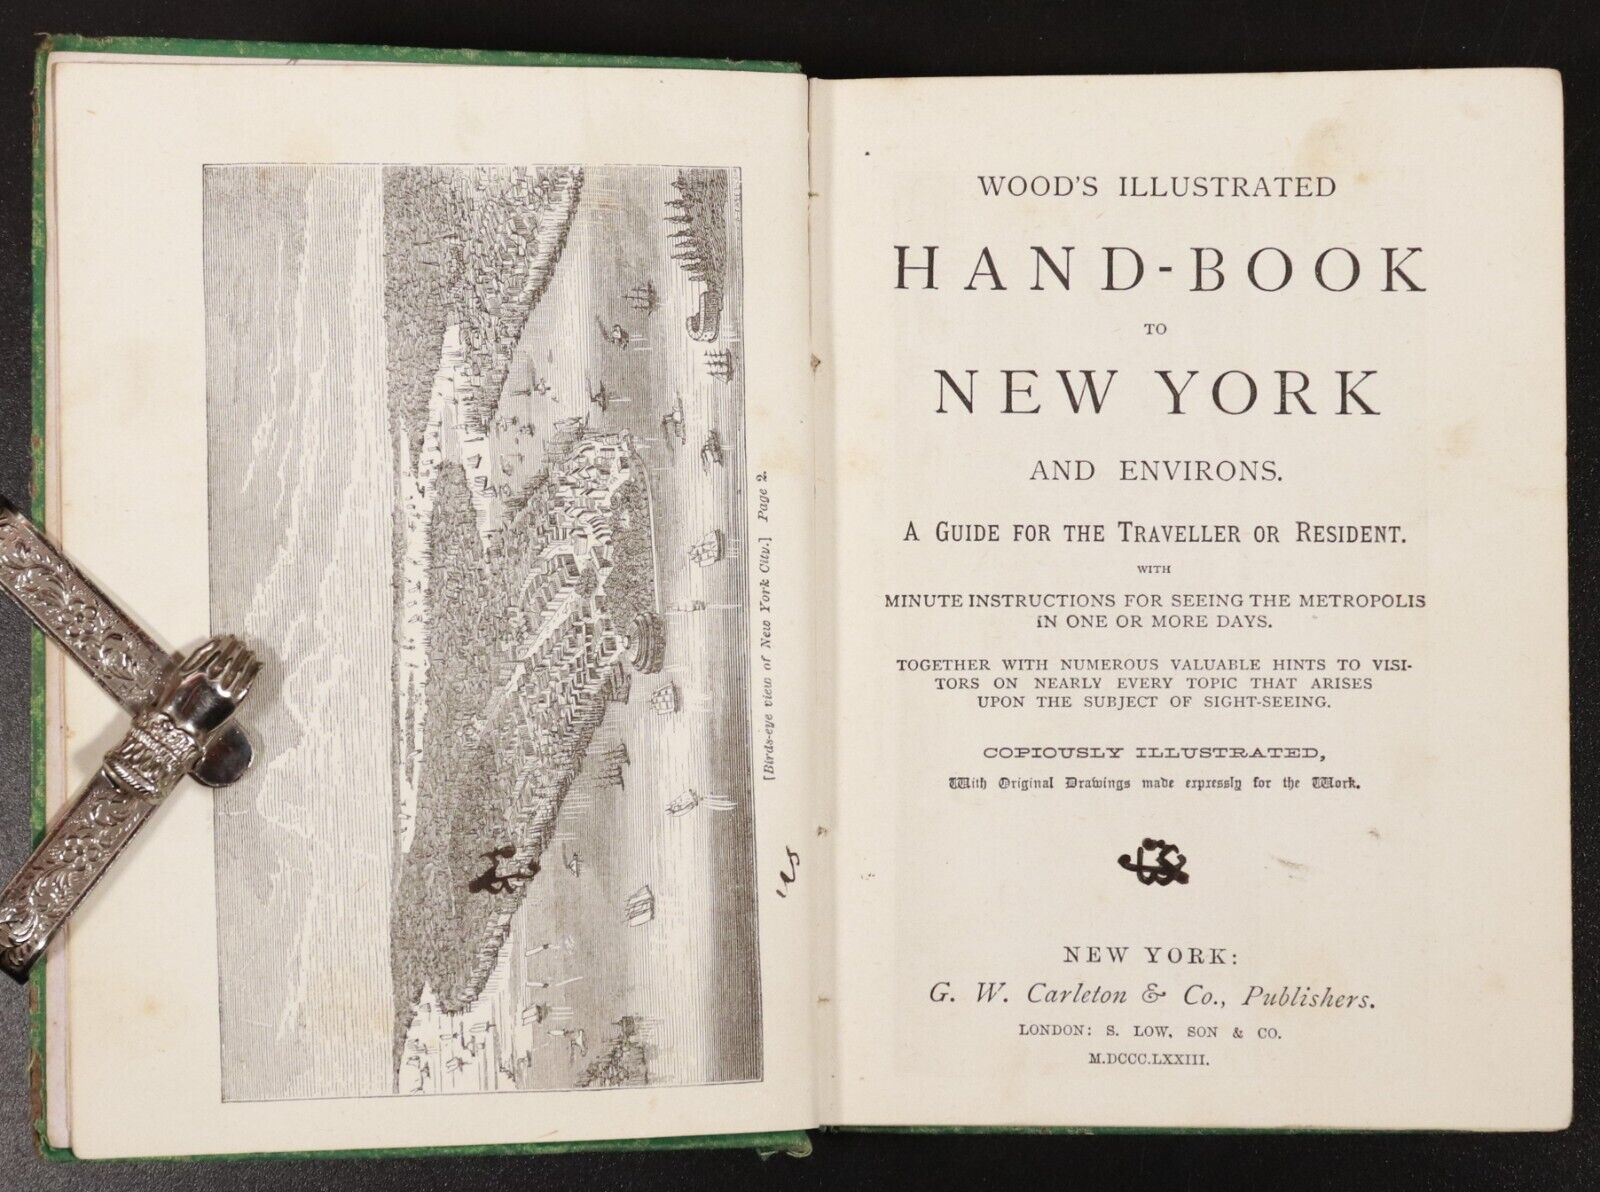 1873 Wood's Illustrated Hand-Book To New York Antiquarian Travel Guide - 0